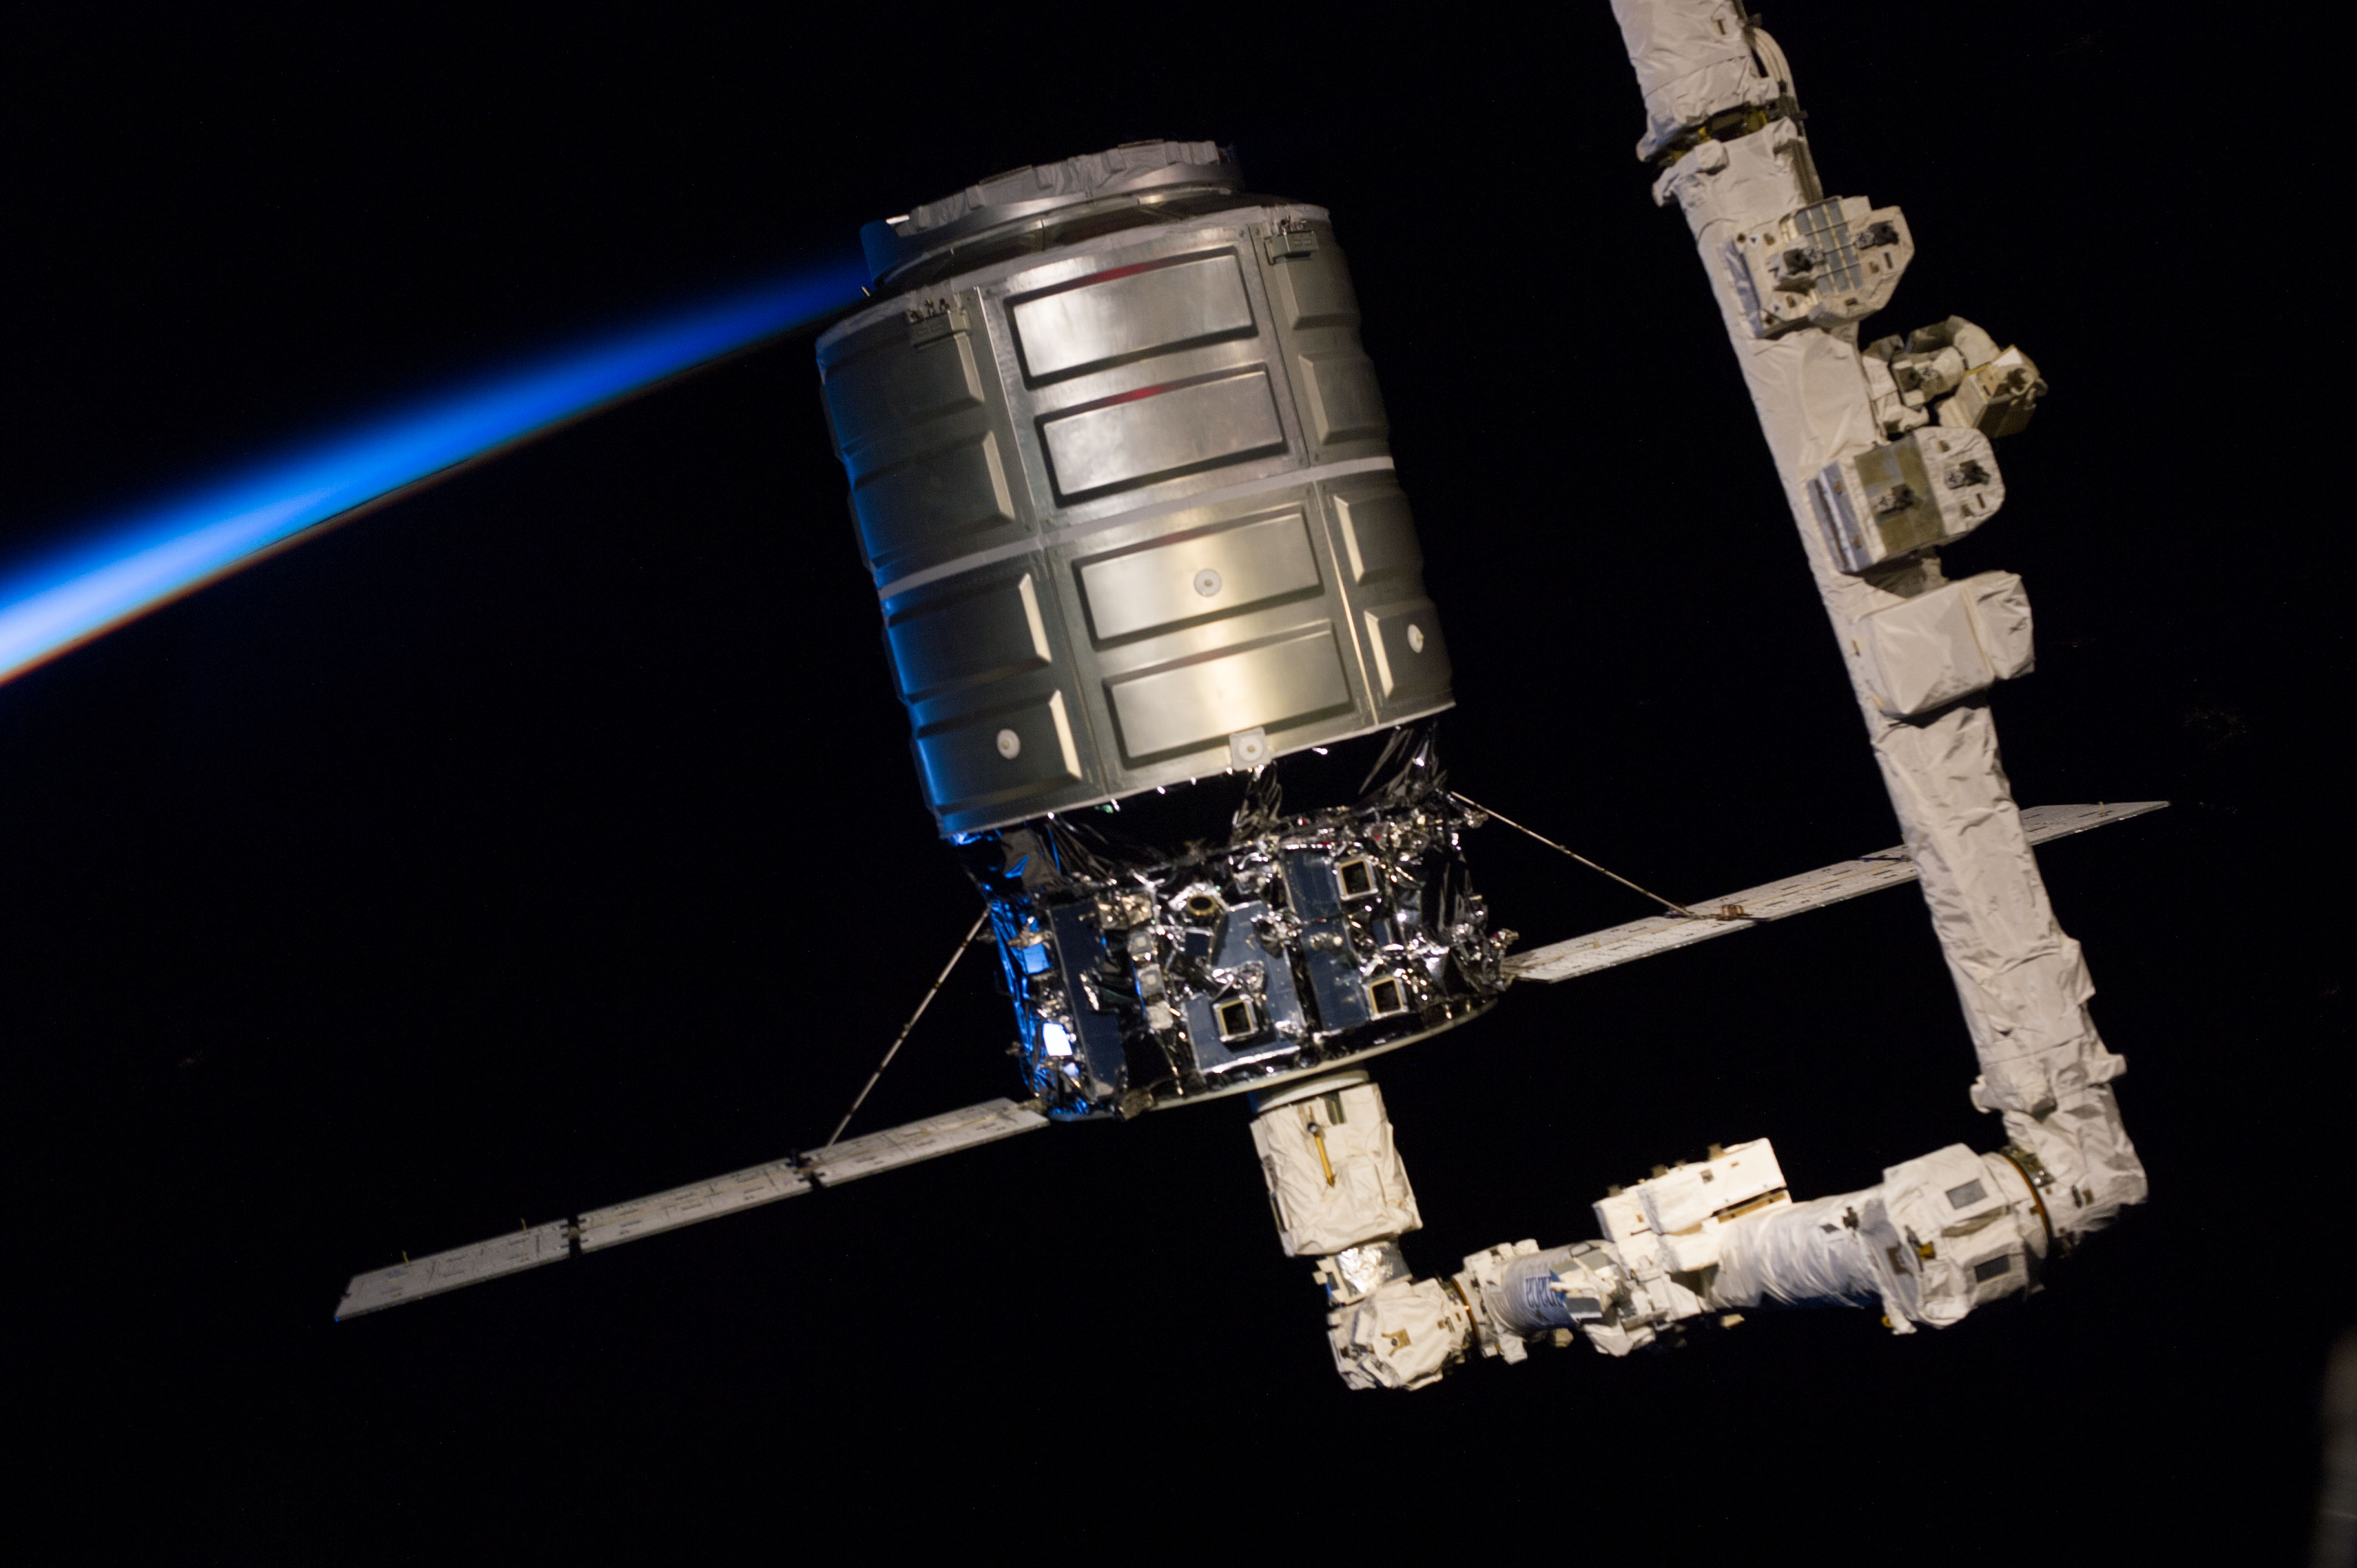 Cygnus Demo spacecraft grappled by Canadarm2 prior to berthing on the space station